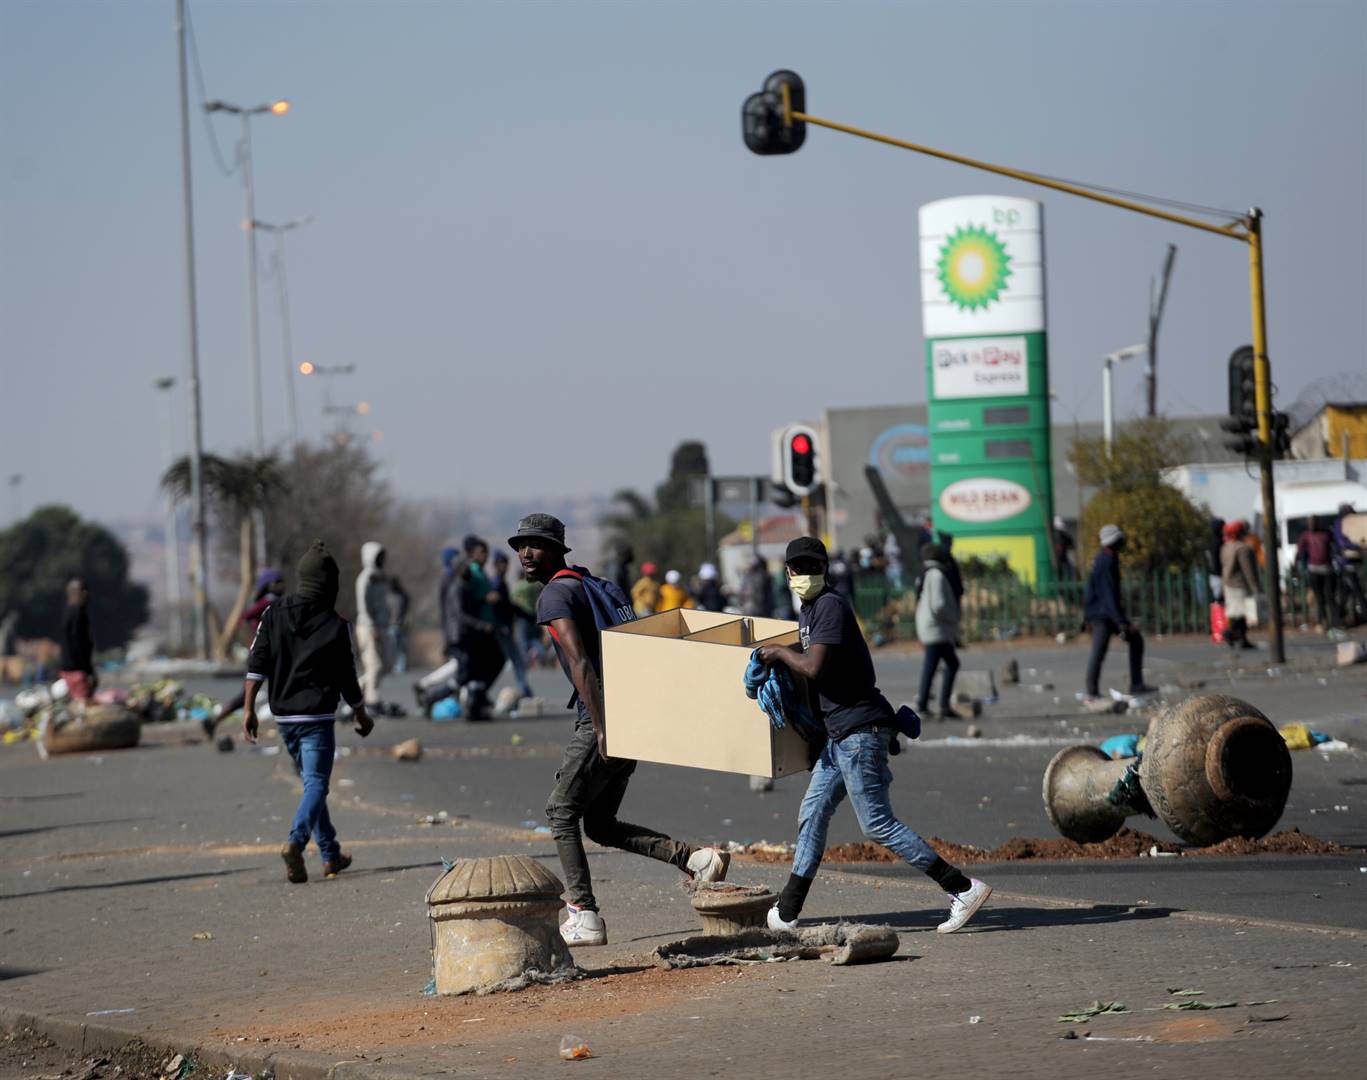 Aftermath at Chris Hani Mall during 'Pro-Zuma' attacks on July 13, 2021 in Vosloorus. It is reported that the mob set the mall on fire, looted several shops and vandalised properties.